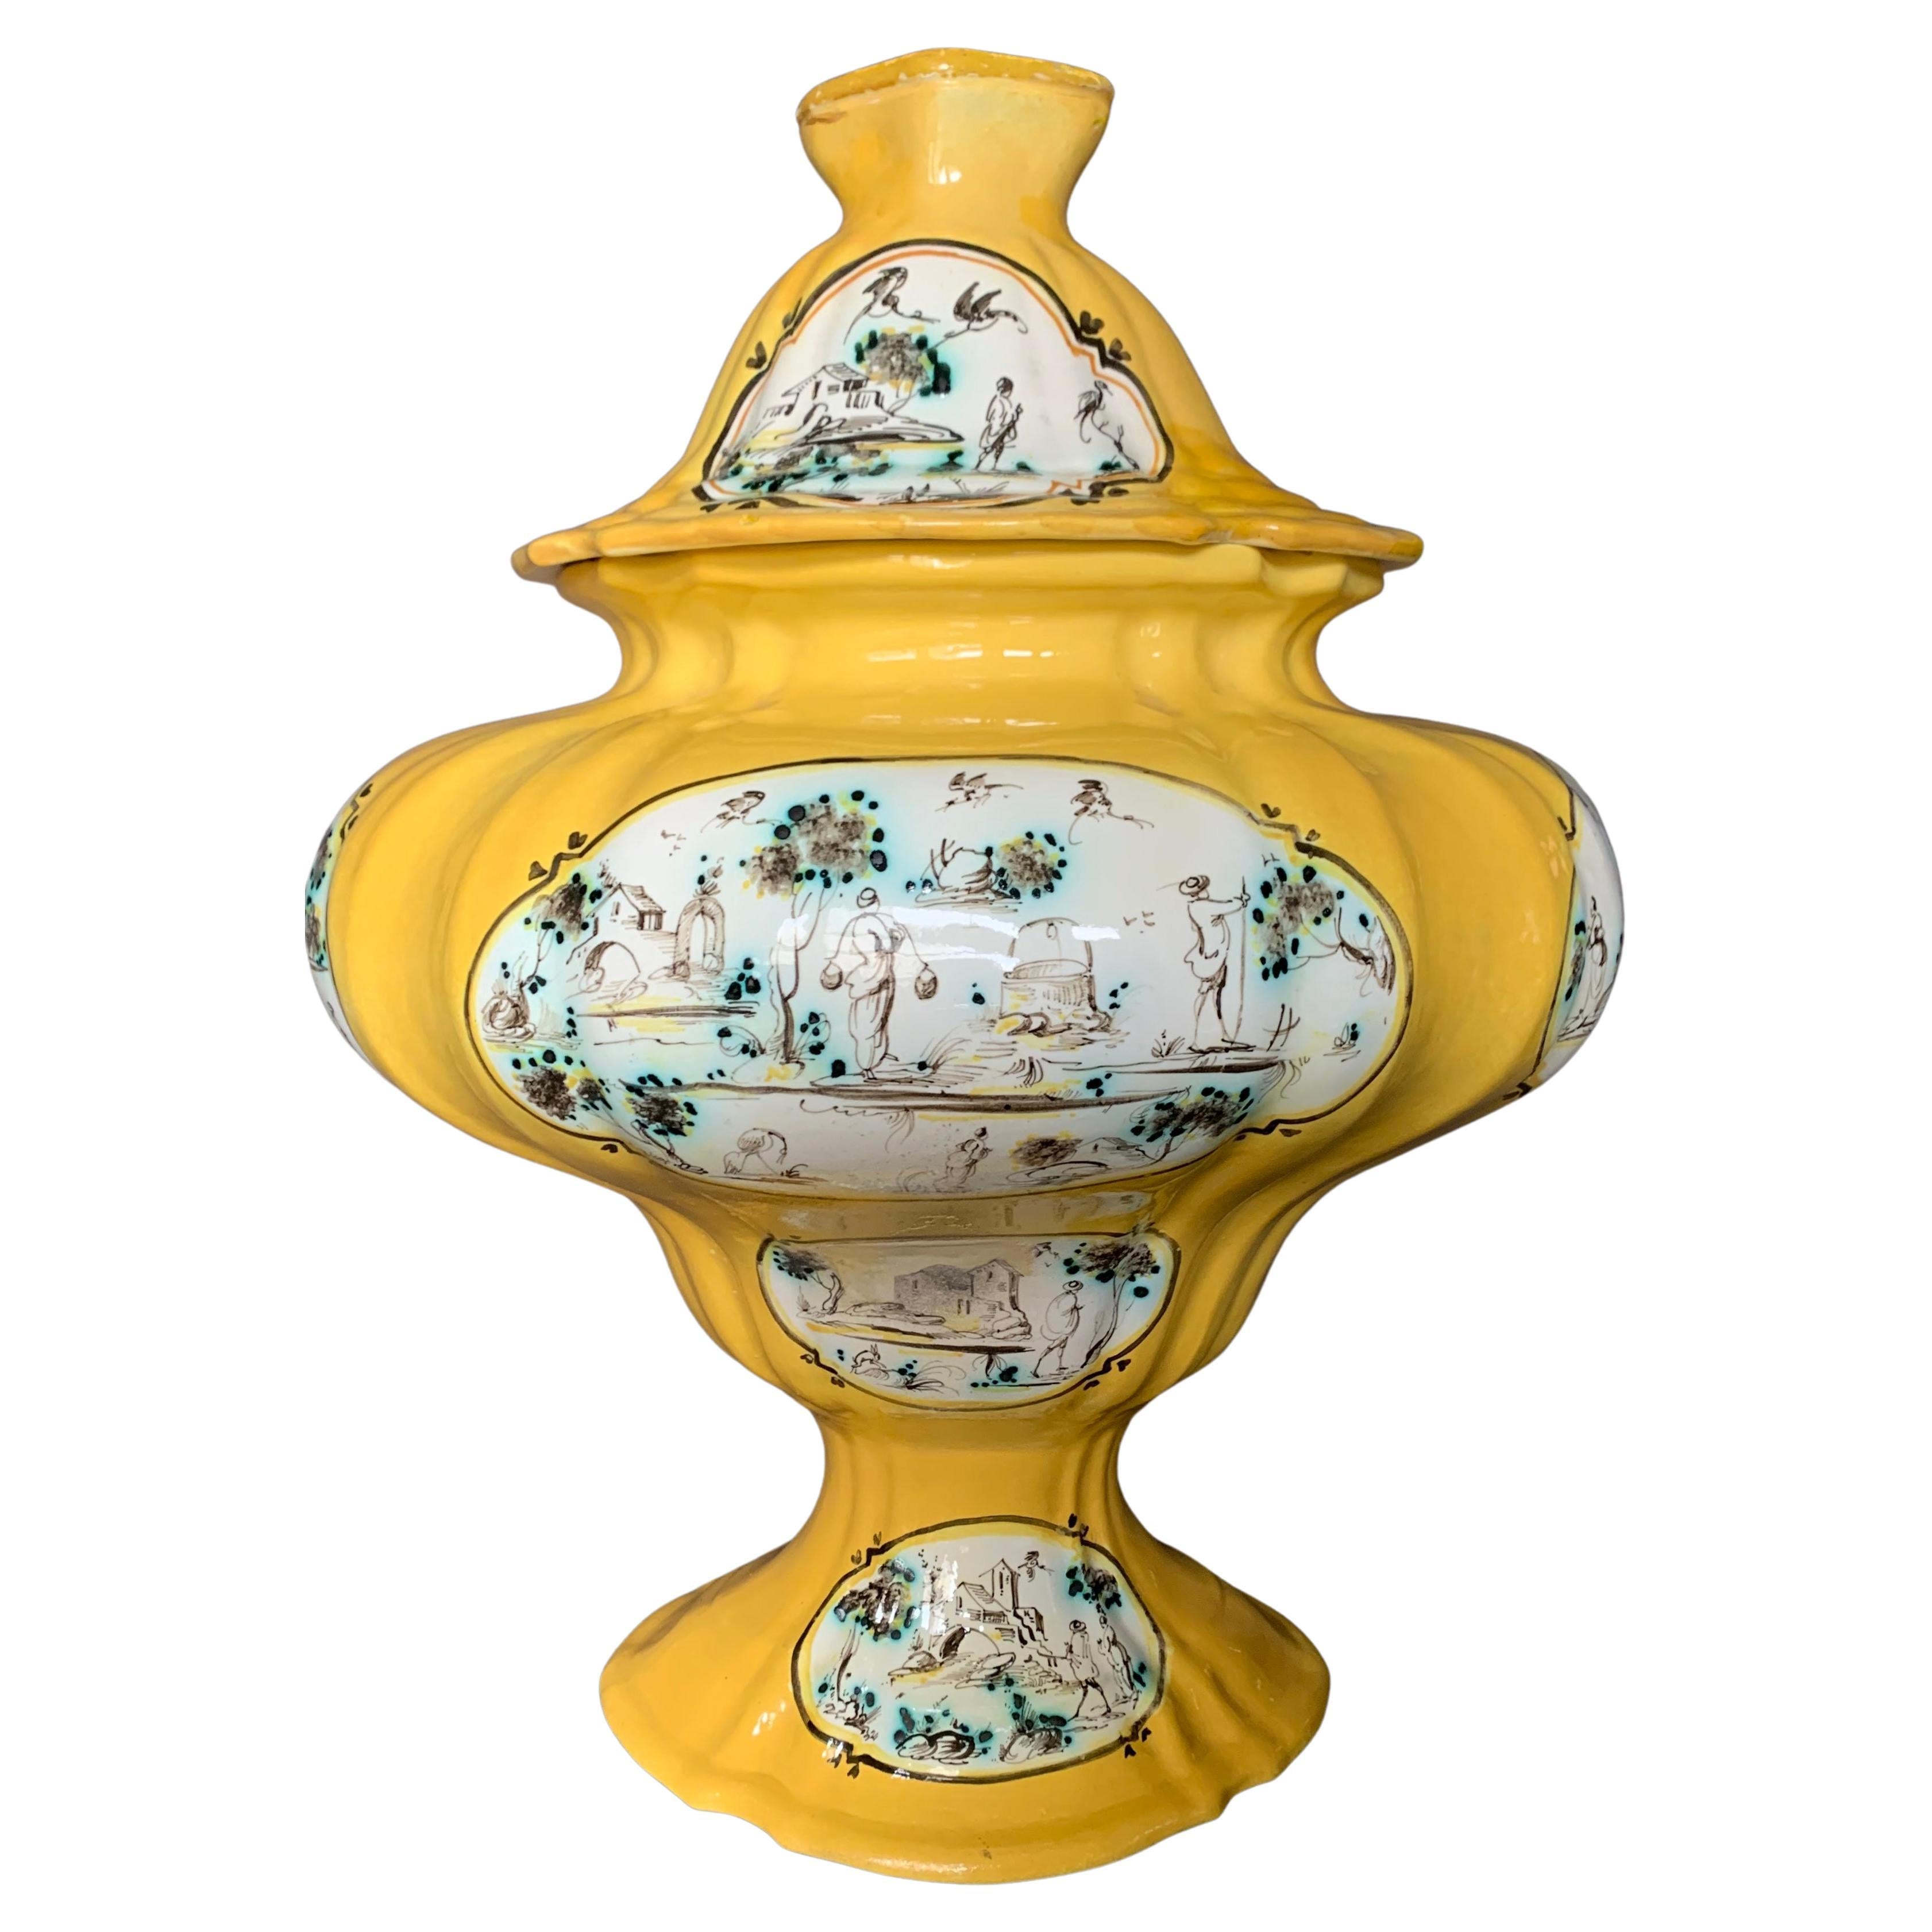 Pair of large Italian yellow faience majolica lidded urns. Striking pair of large scale baluster form urns in Levantino Albisola style with medallions depicting various rural landscapes with hunters, farmers, horse riders, etc. in sepia browns and